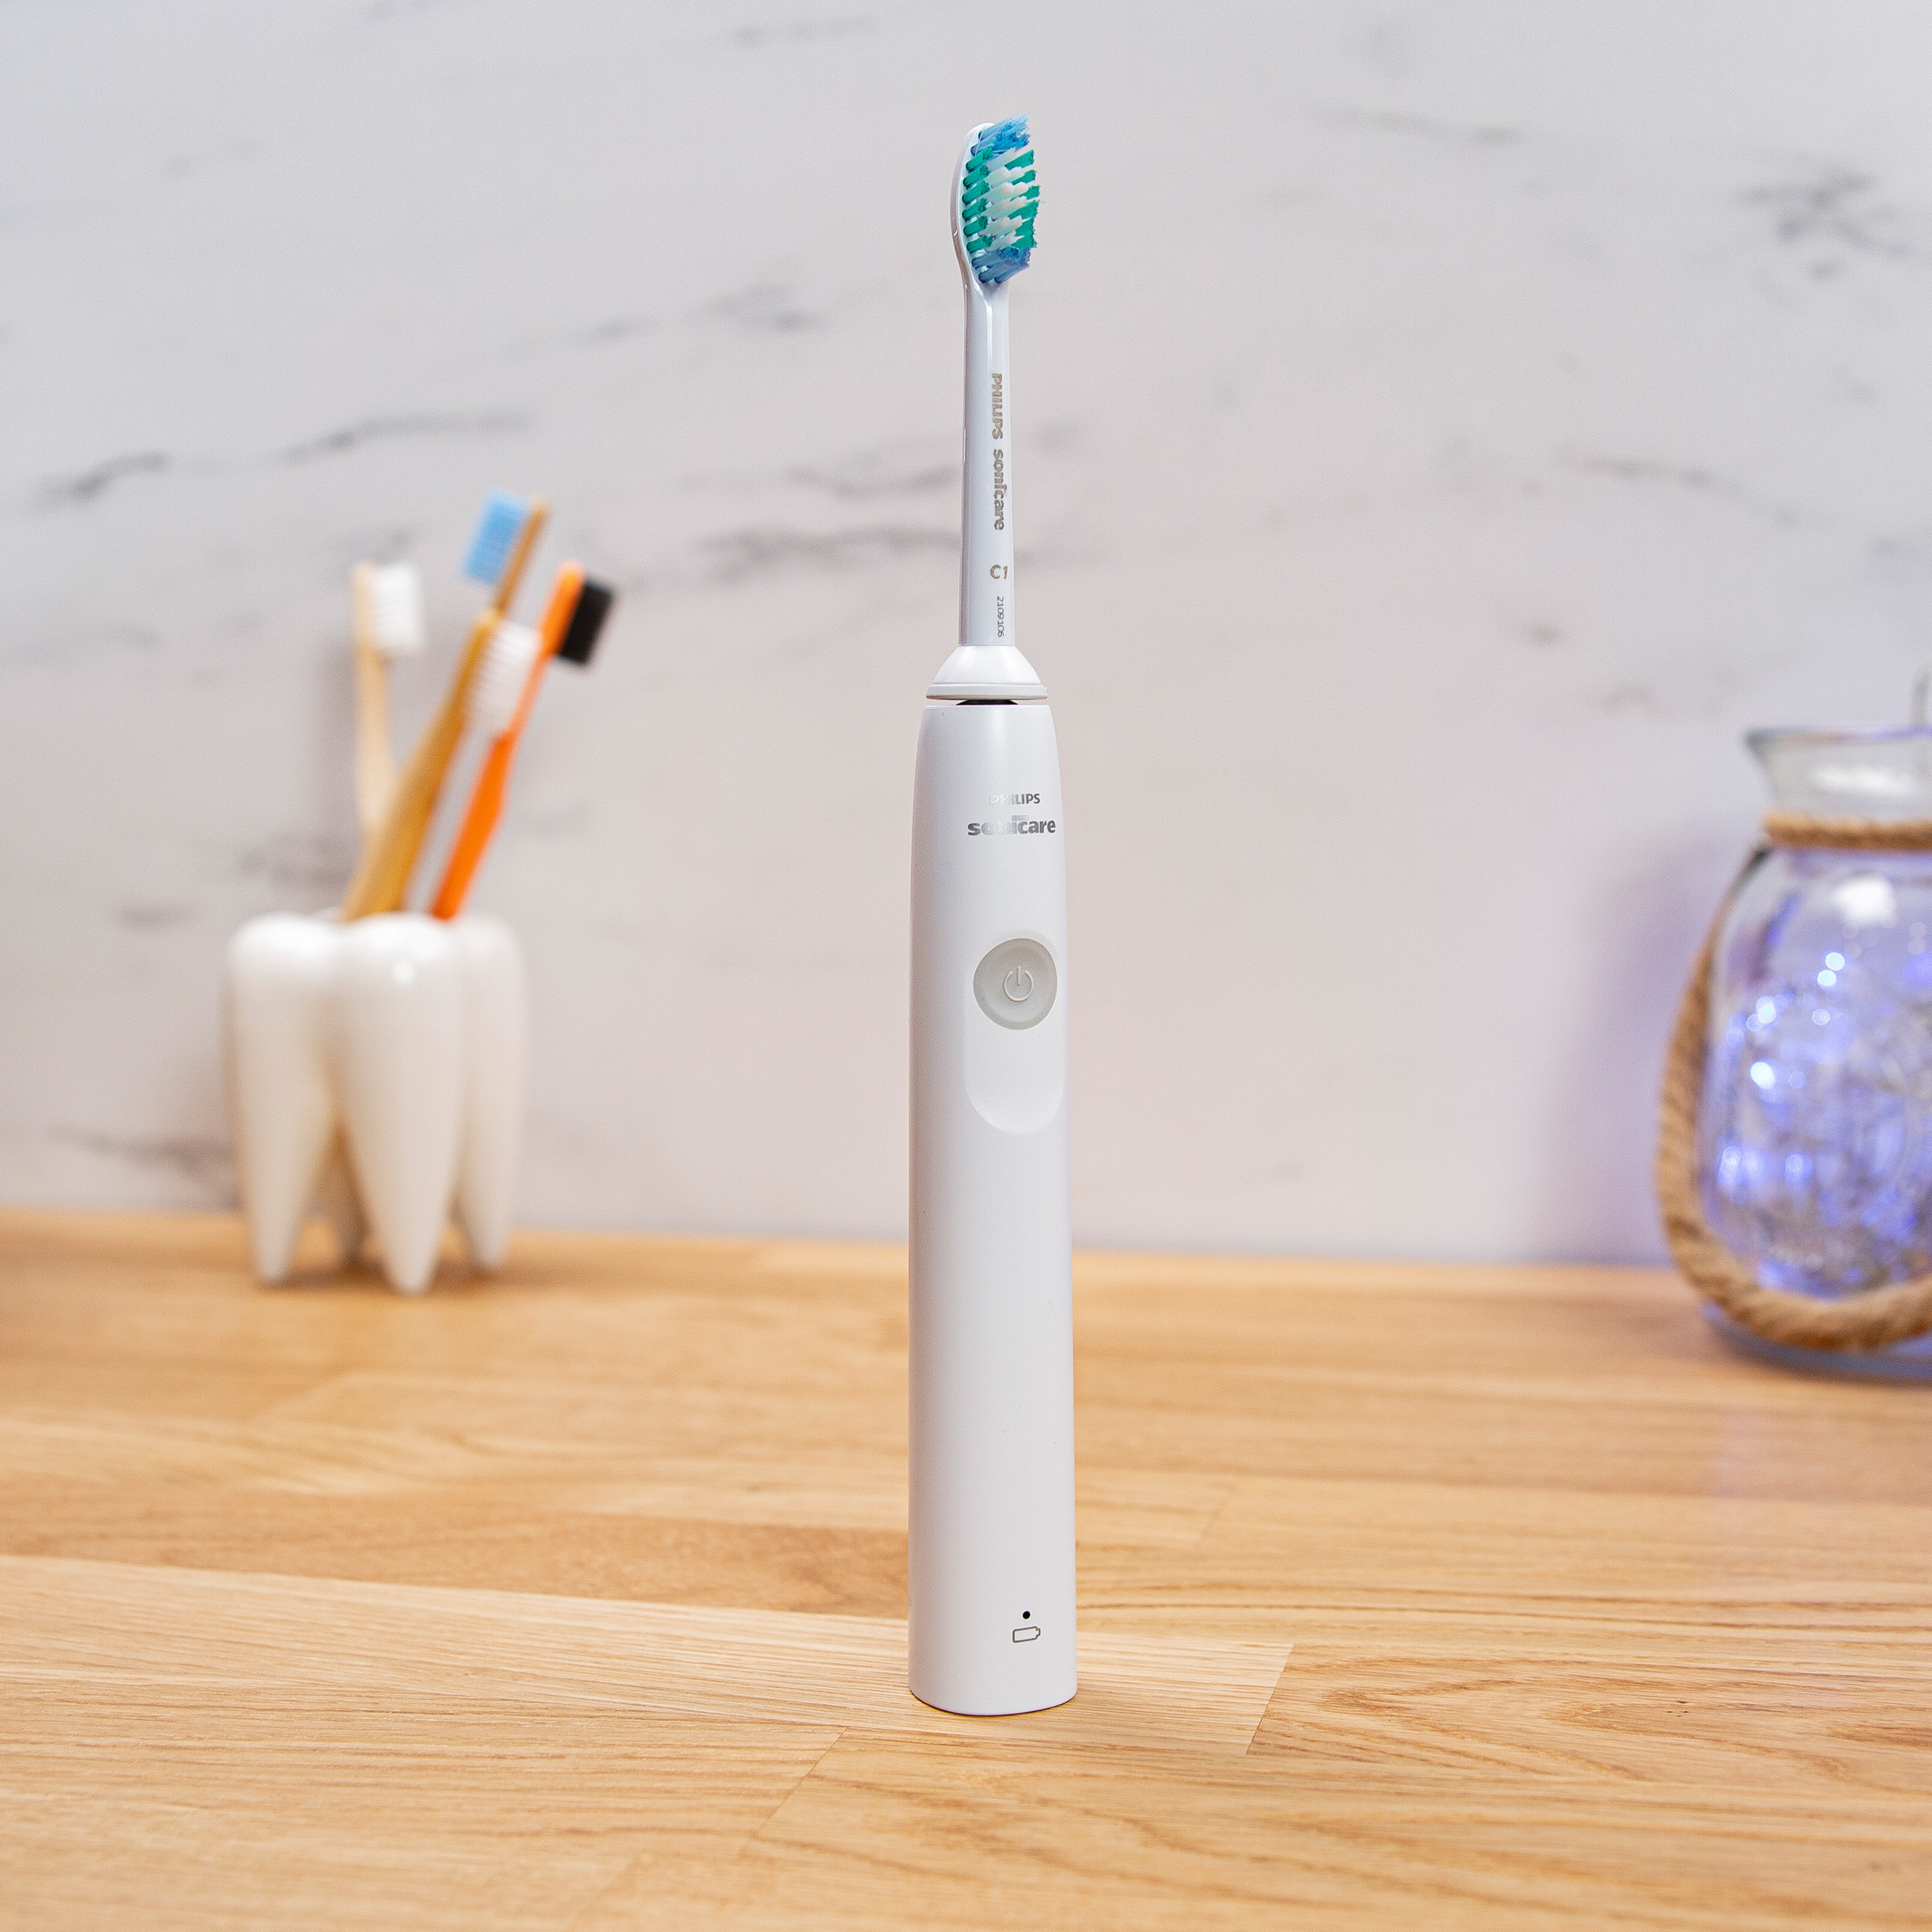 File:Philips Sonicare 1100 Series Electric Toothbrush - 51967361282.jpg -  Wikimedia Commons